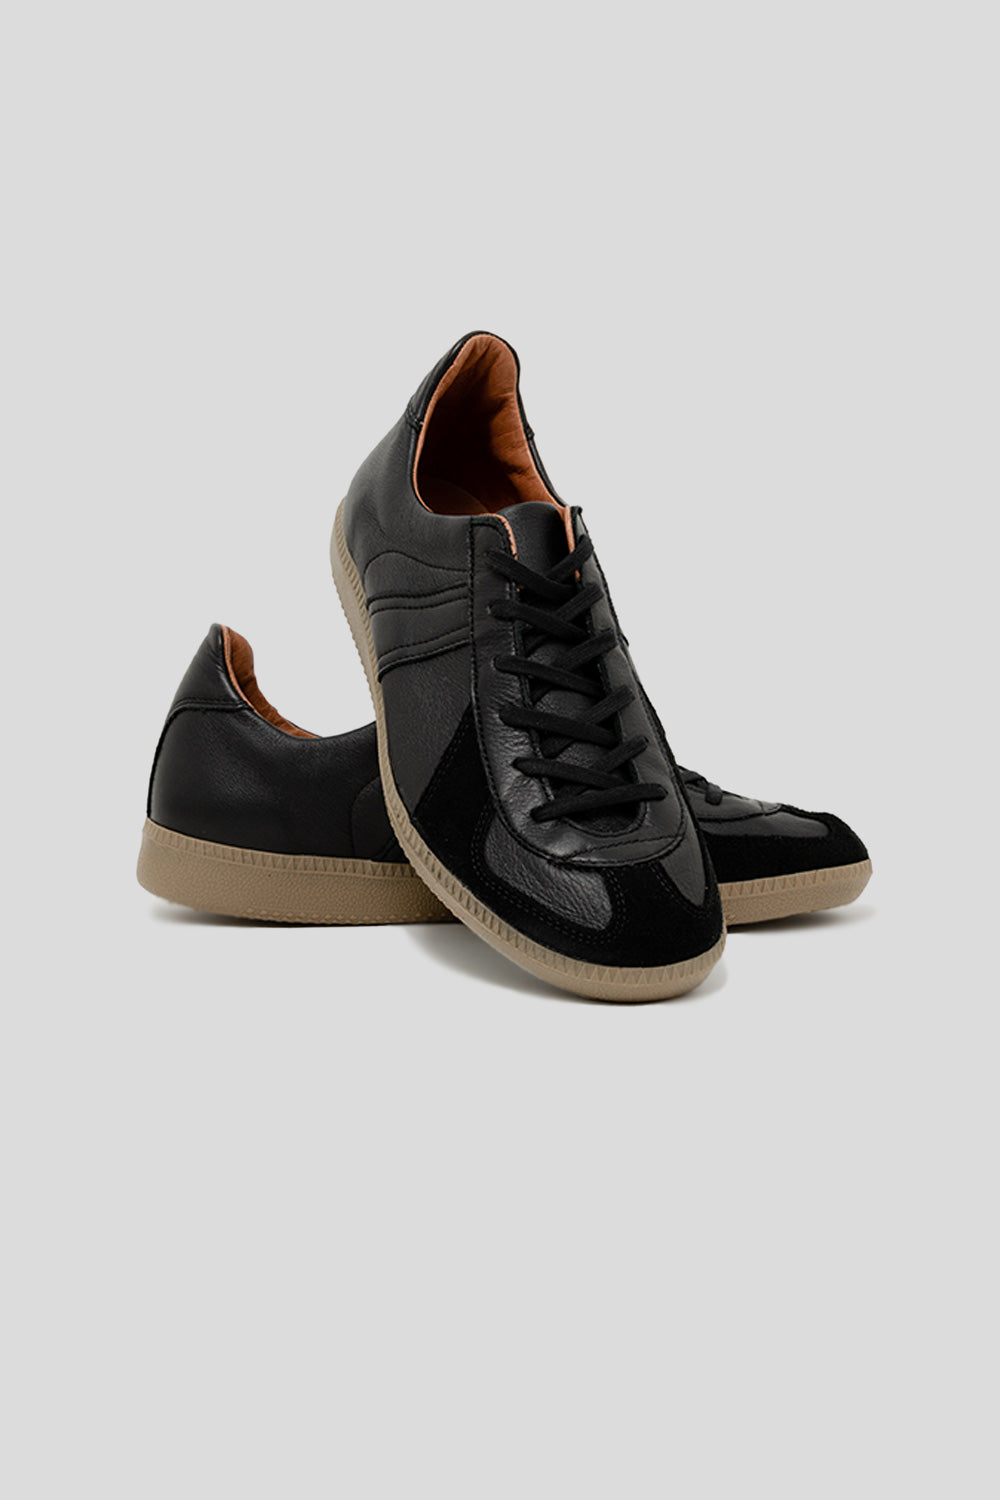 Reproduction of Found German Military Trainer in Black | Wallace ...